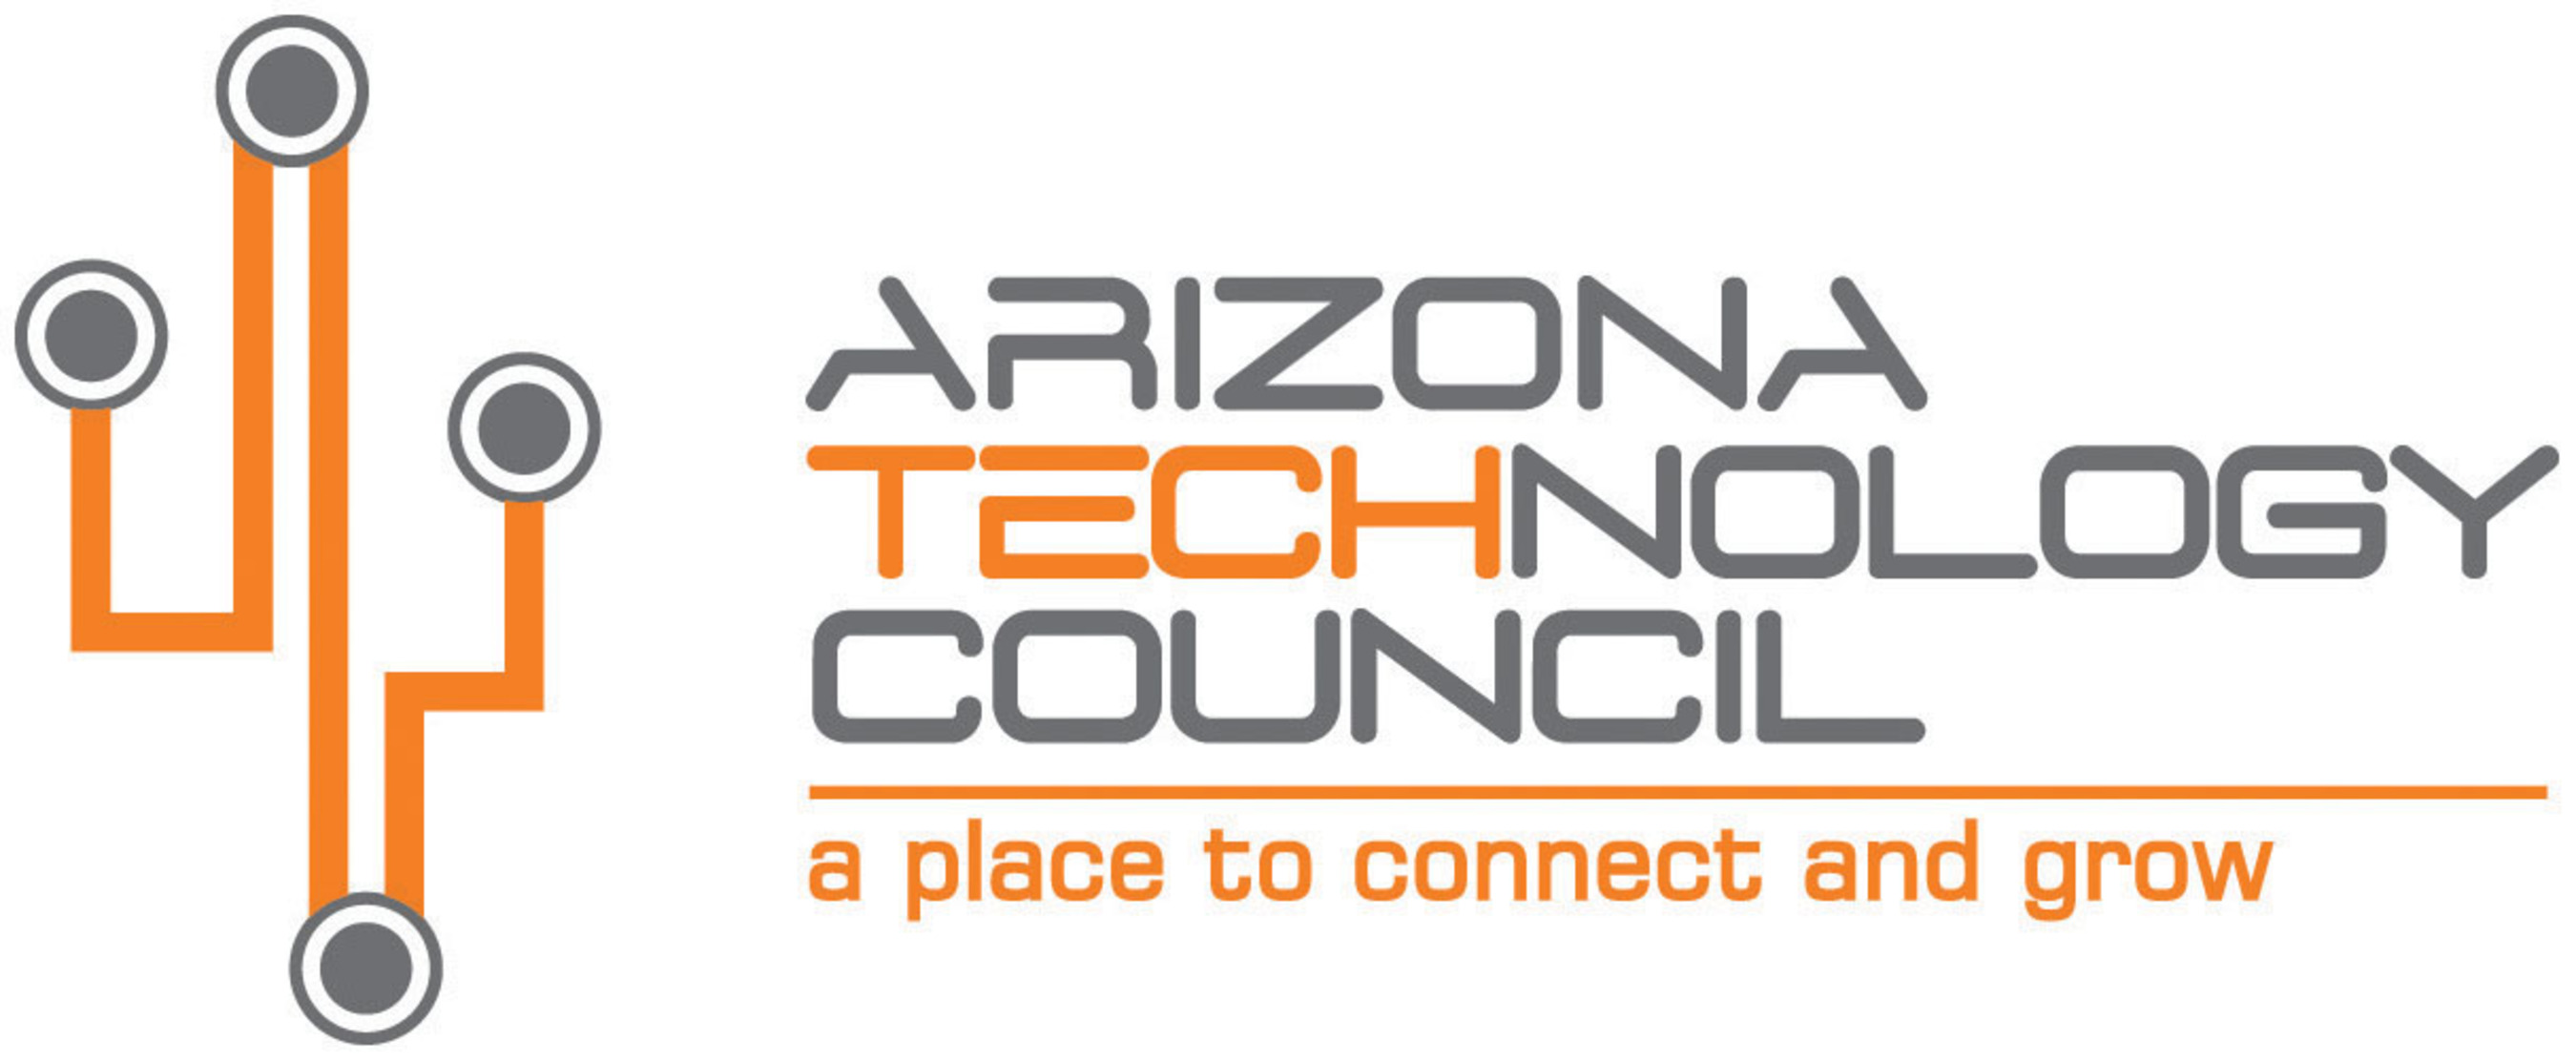 The Arizona Technology Council is Arizona’s premier trade association for science and technology companies. Recognized as having a diverse professional business community, Council members work towards furthering the advancement of technology in Arizona through leadership, education, legislation and social action. The Arizona Technology Council offers numerous events, educational forums and business conferences that bring together leaders, managers, employees and visionaries to make an impact on the technology industry.  These interactions contribute to the Council’s culture of growing member businesses and transforming technology in Arizona. To become a member or to learn more about the Arizona Technology Council, please visit http://www.aztechcouncil.org.  (PRNewsFoto/Arizona Technology Council)